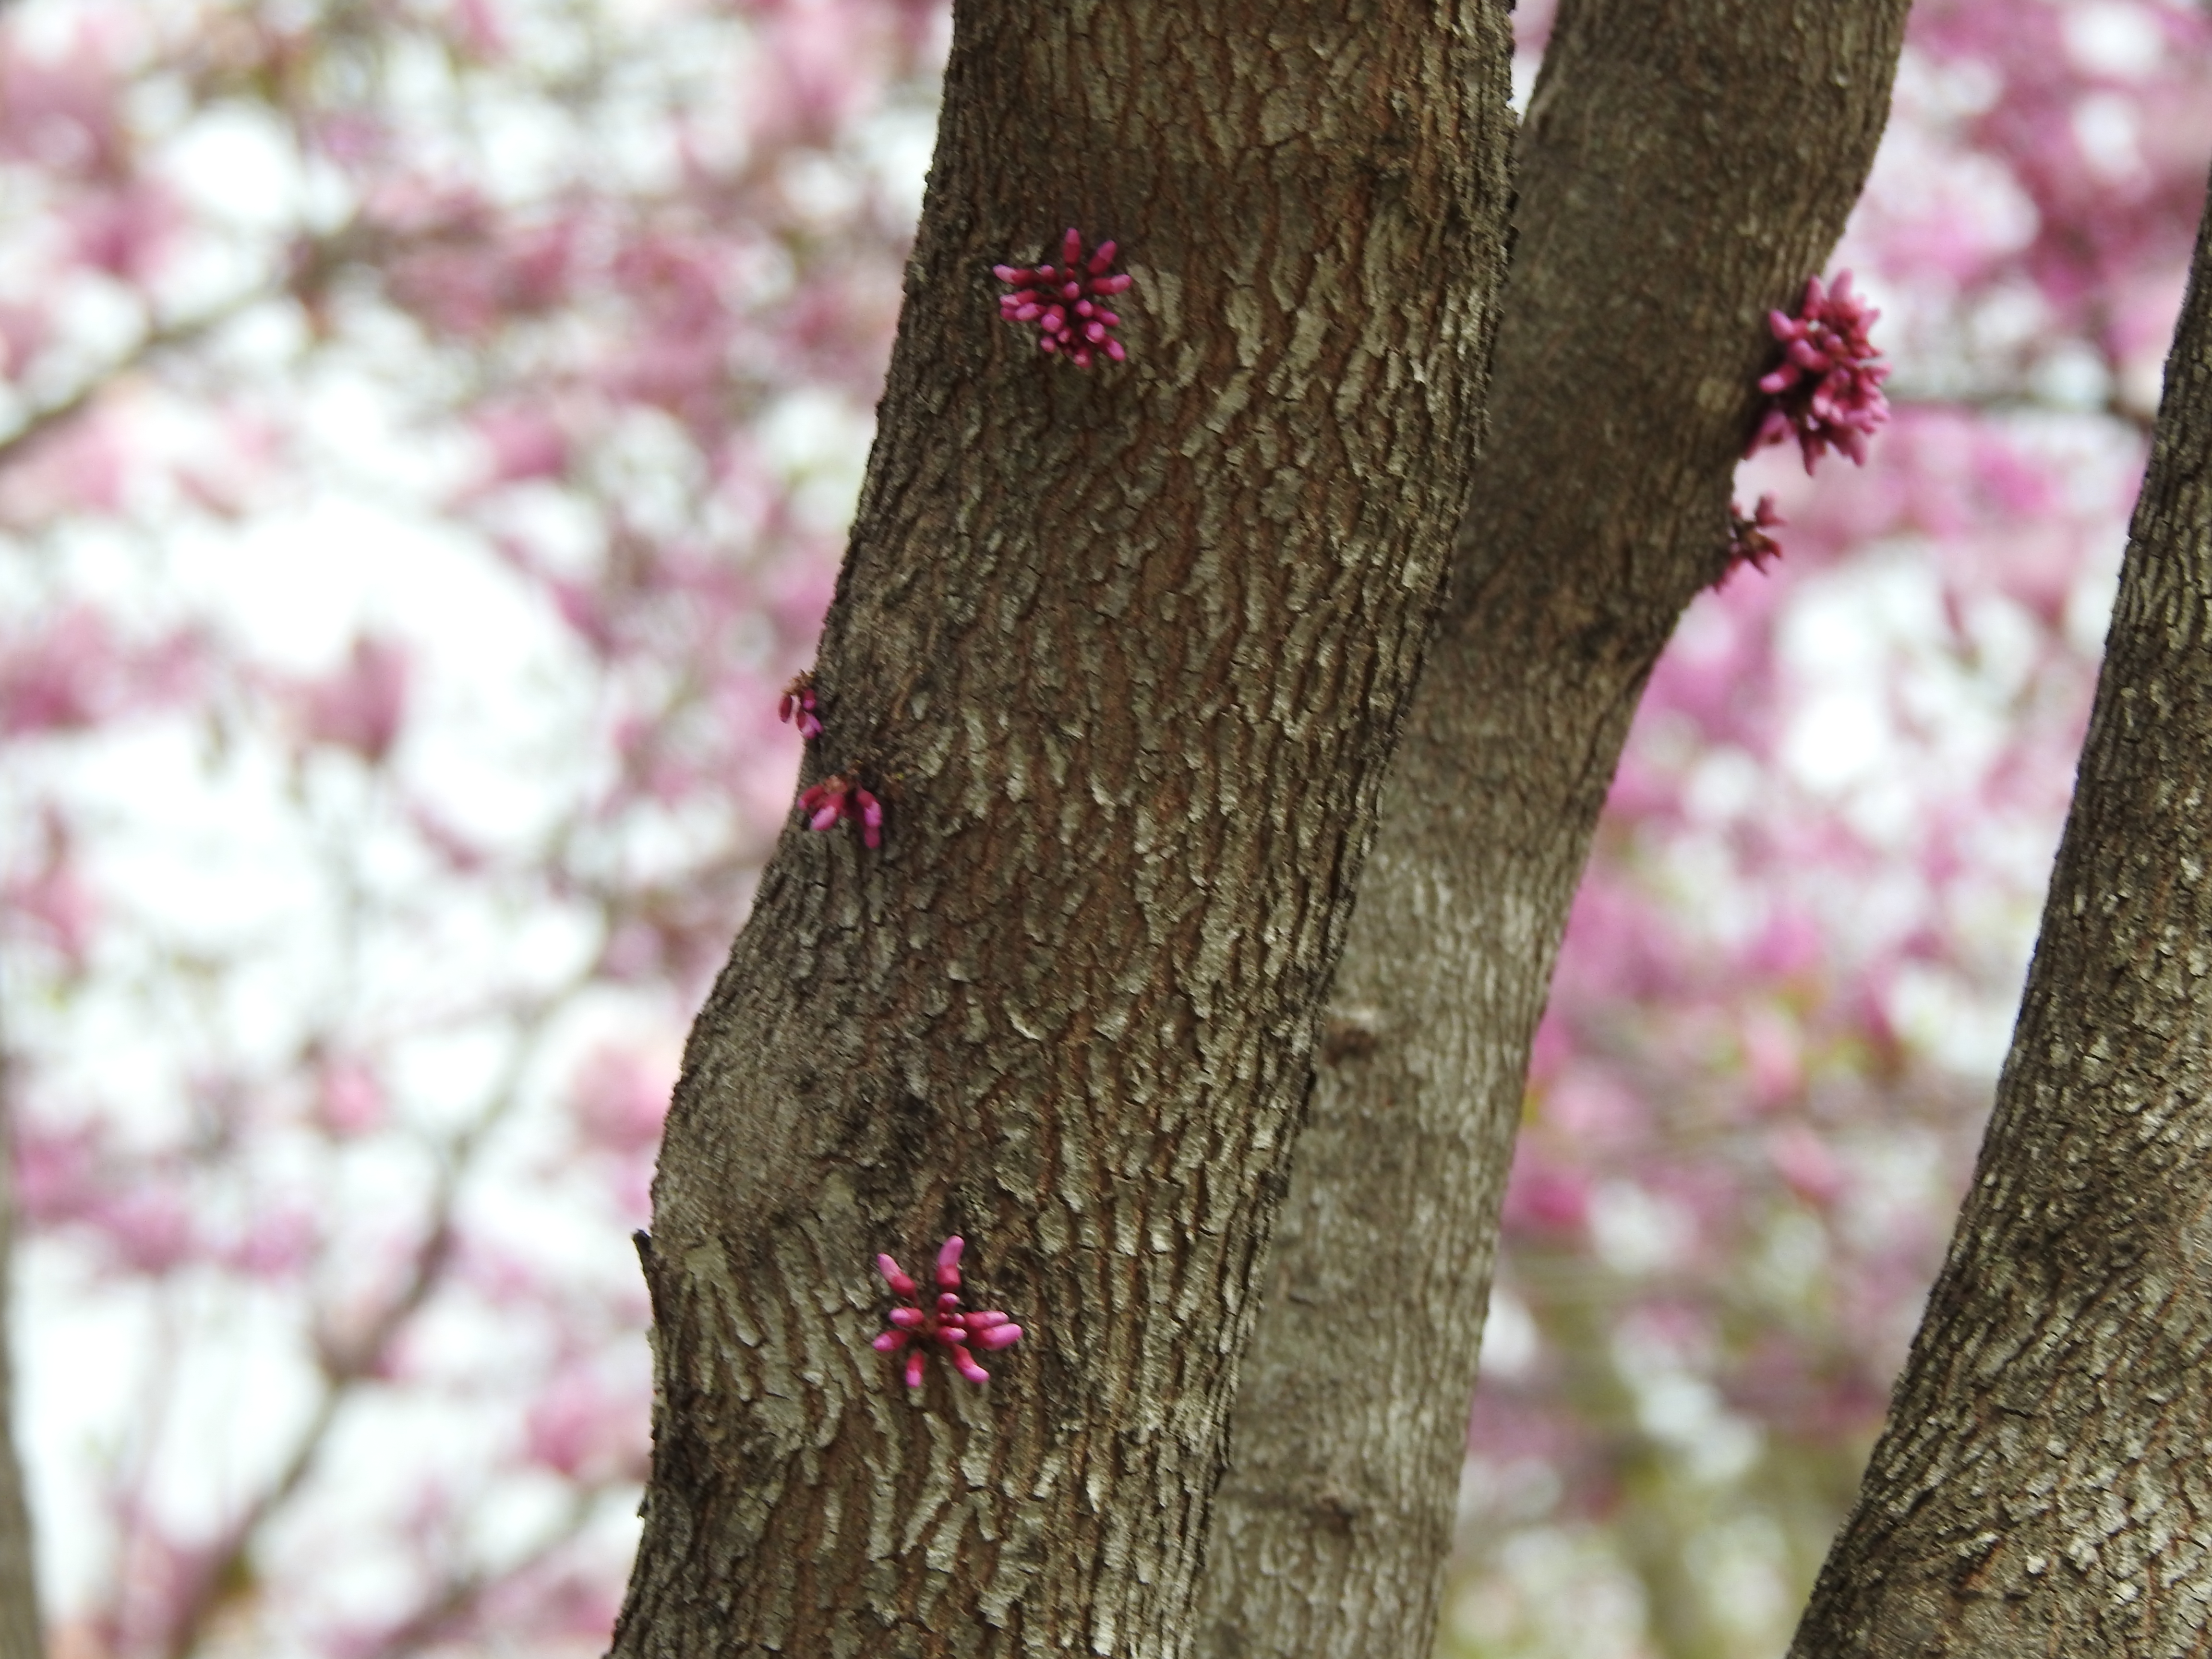 A closeup of a tree's main trunk with small reddish buds growing out of it